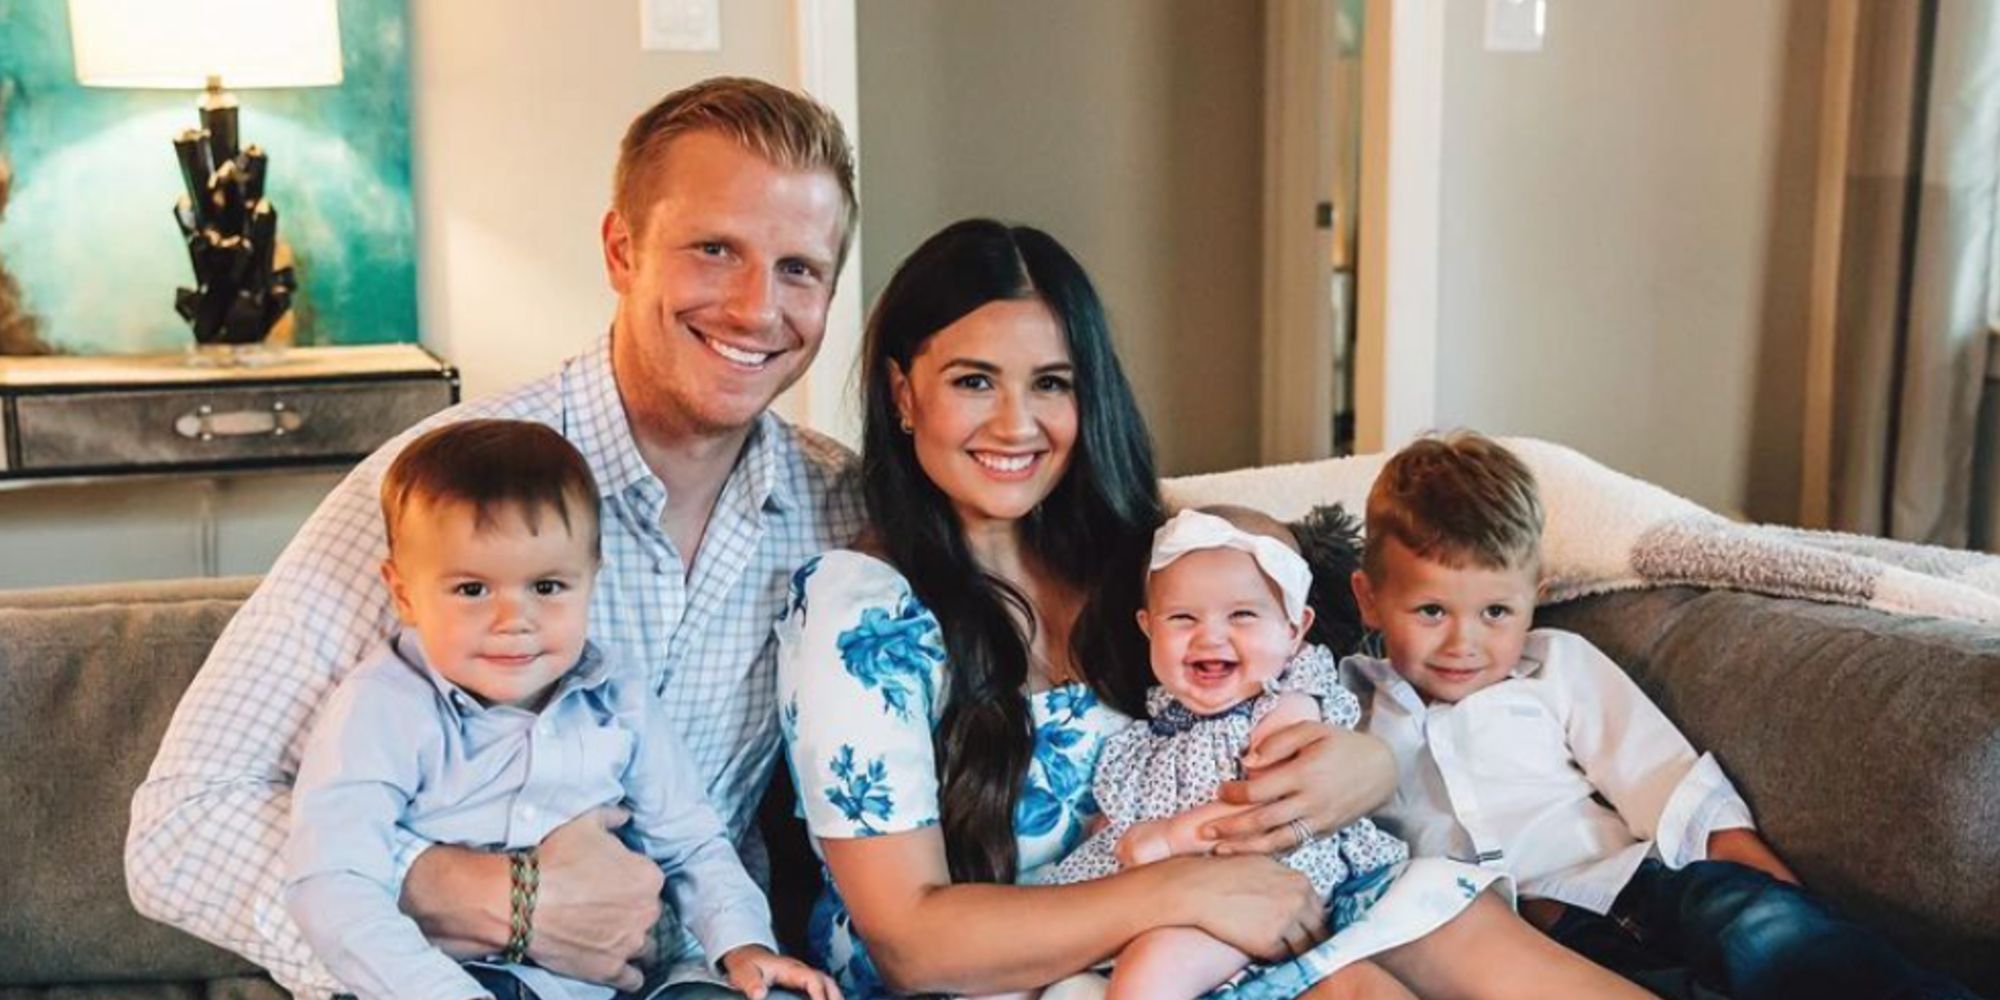 The Bachelor Sean Lowe And Catherine Giudici with their children posing for a photo